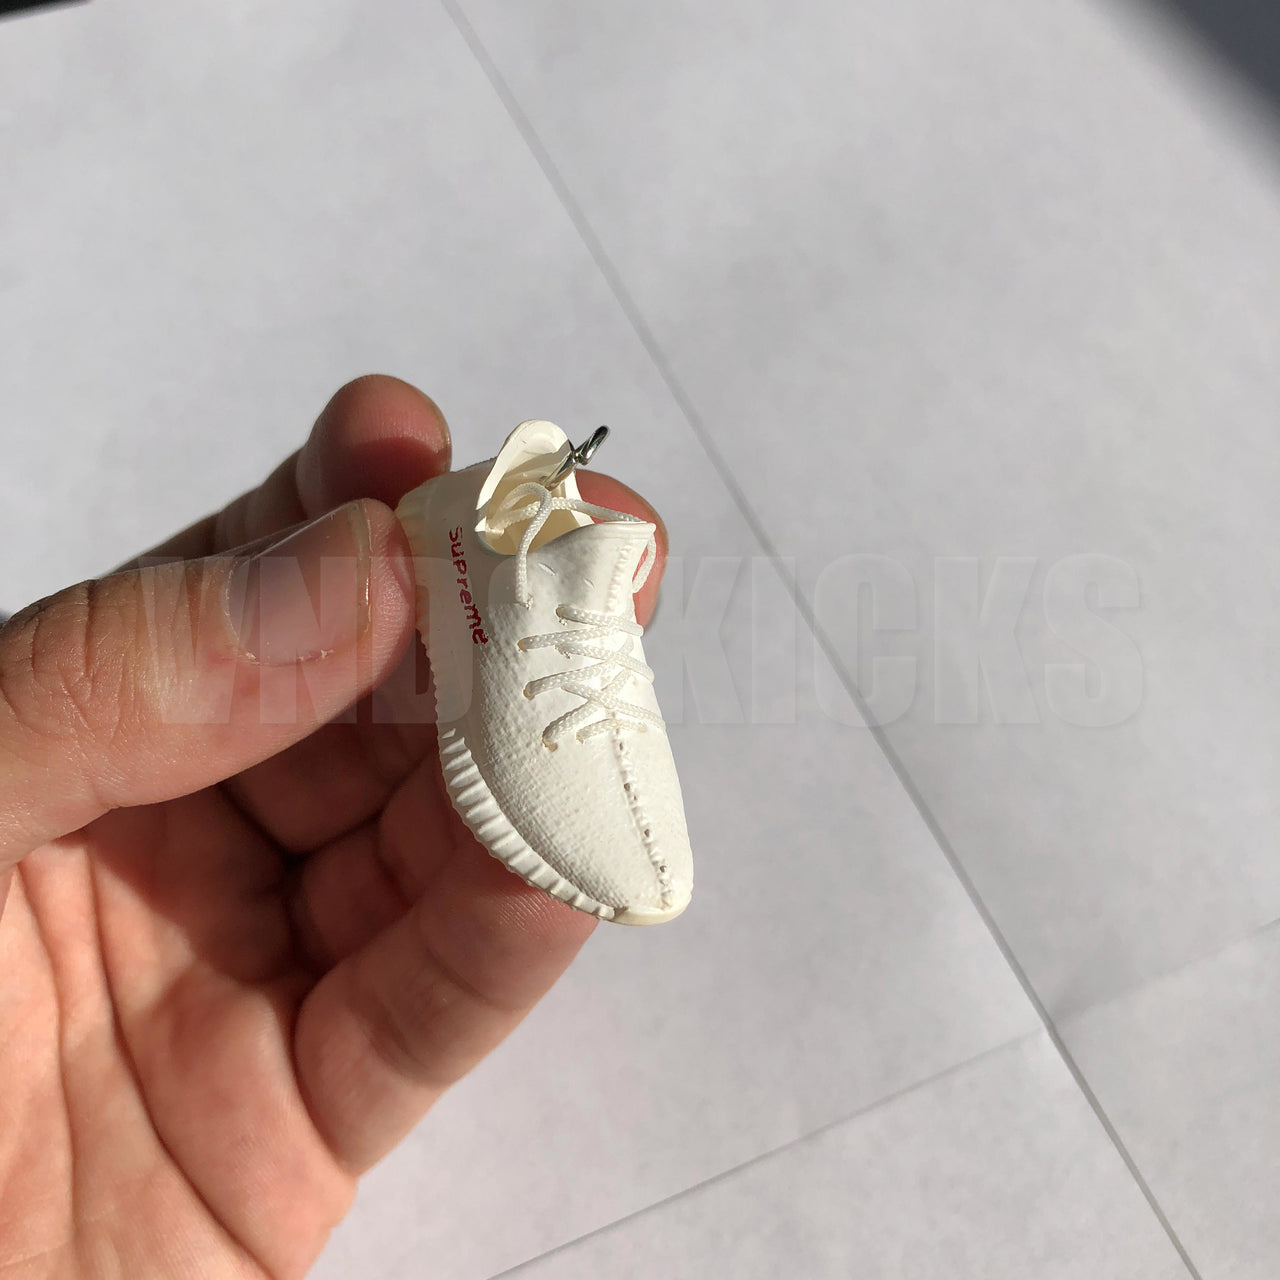 Yeezy 350 Boost Supreme - Sneakers 3D Keychain